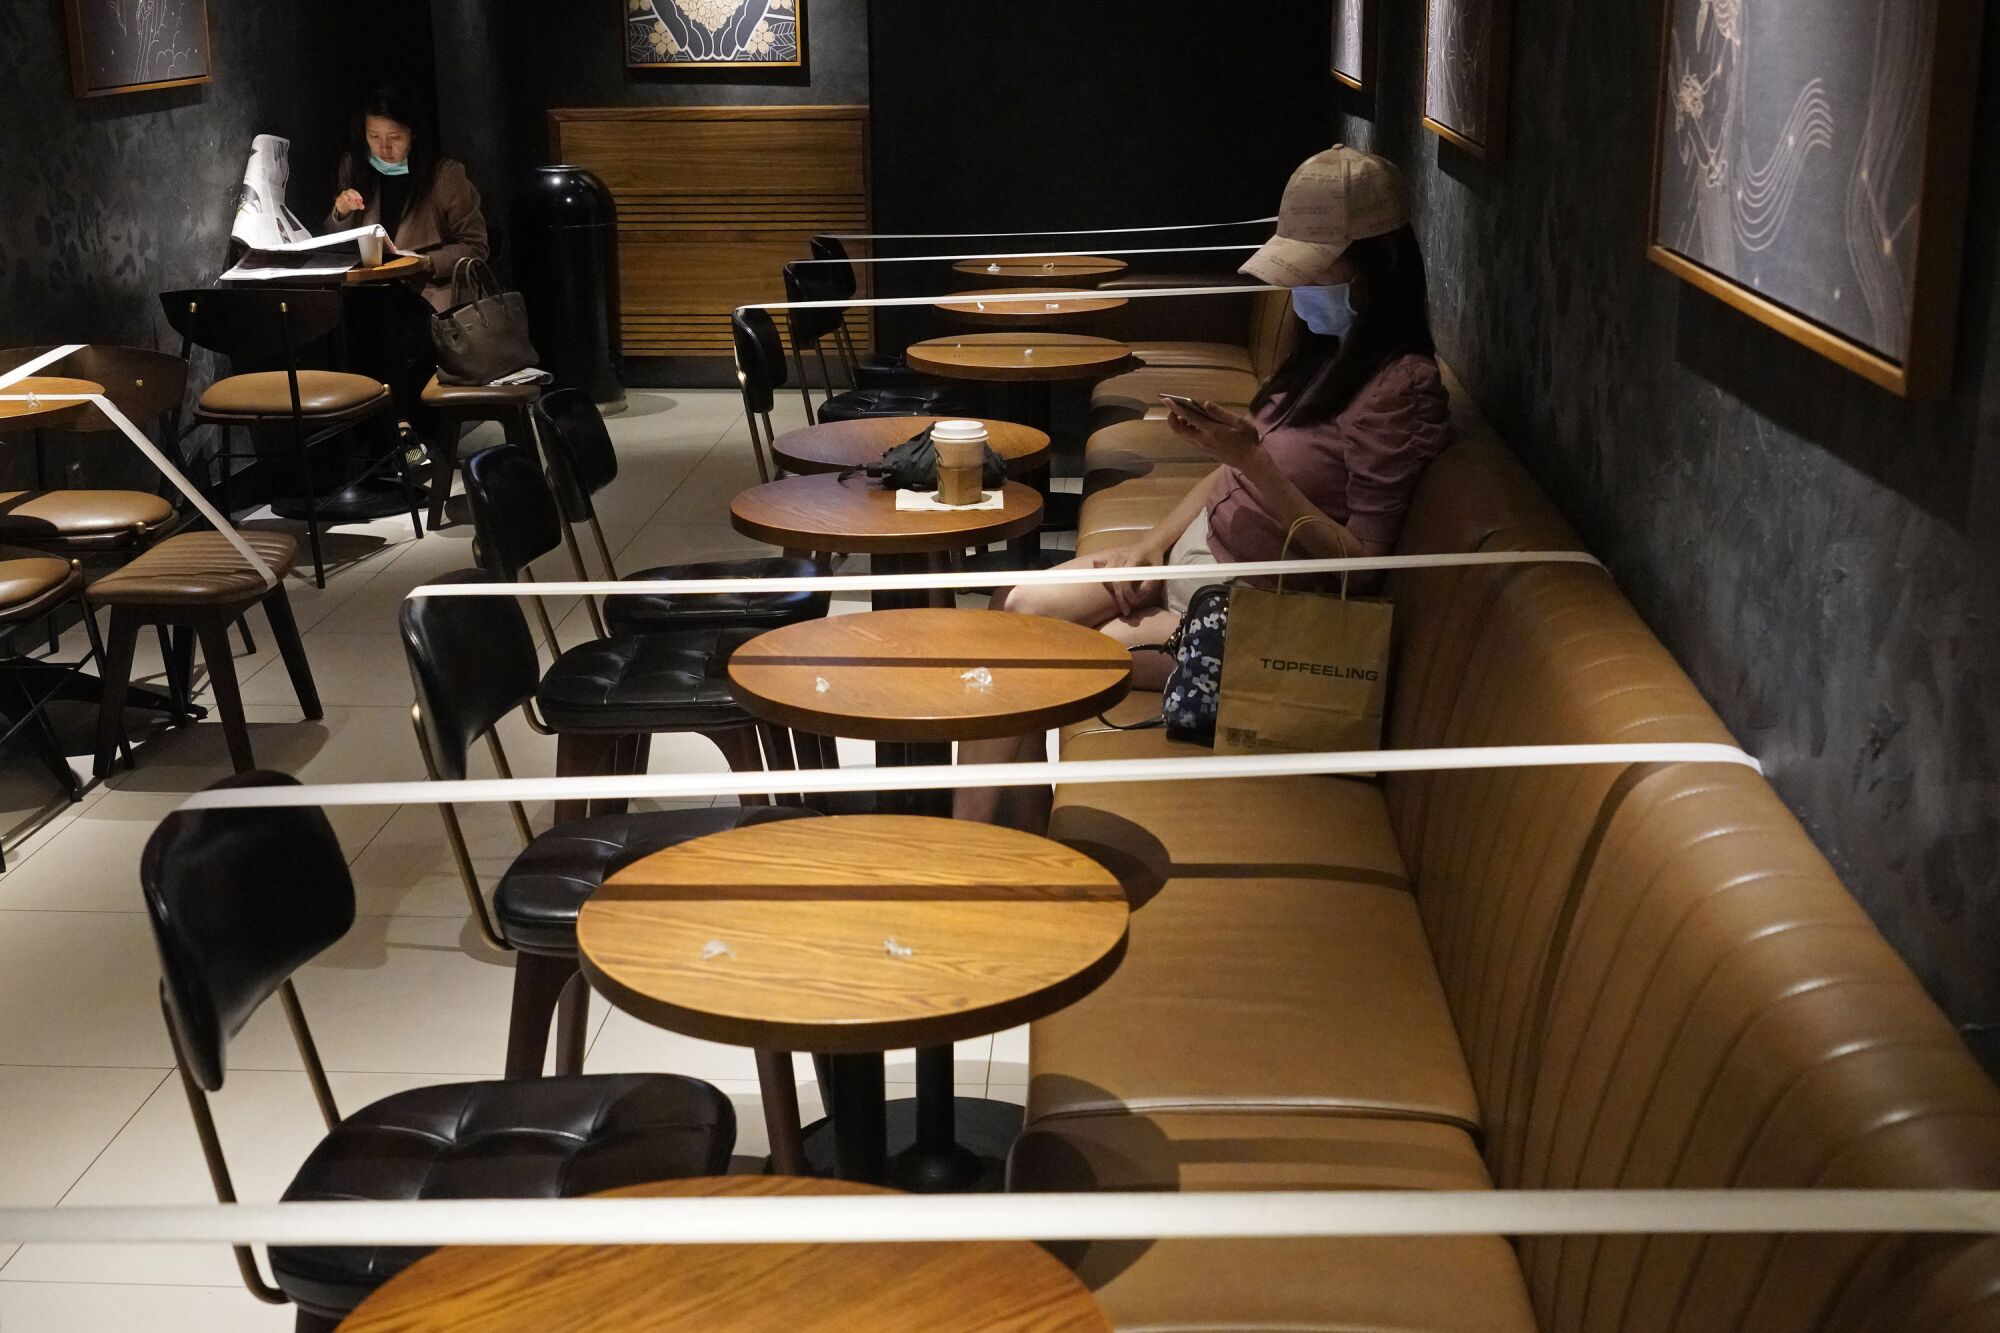 HONG KONG: Tables and chairs are taped for social-distancing law enforcement to help curb the spread of the coronavirus at a Starbucks coffee shop.